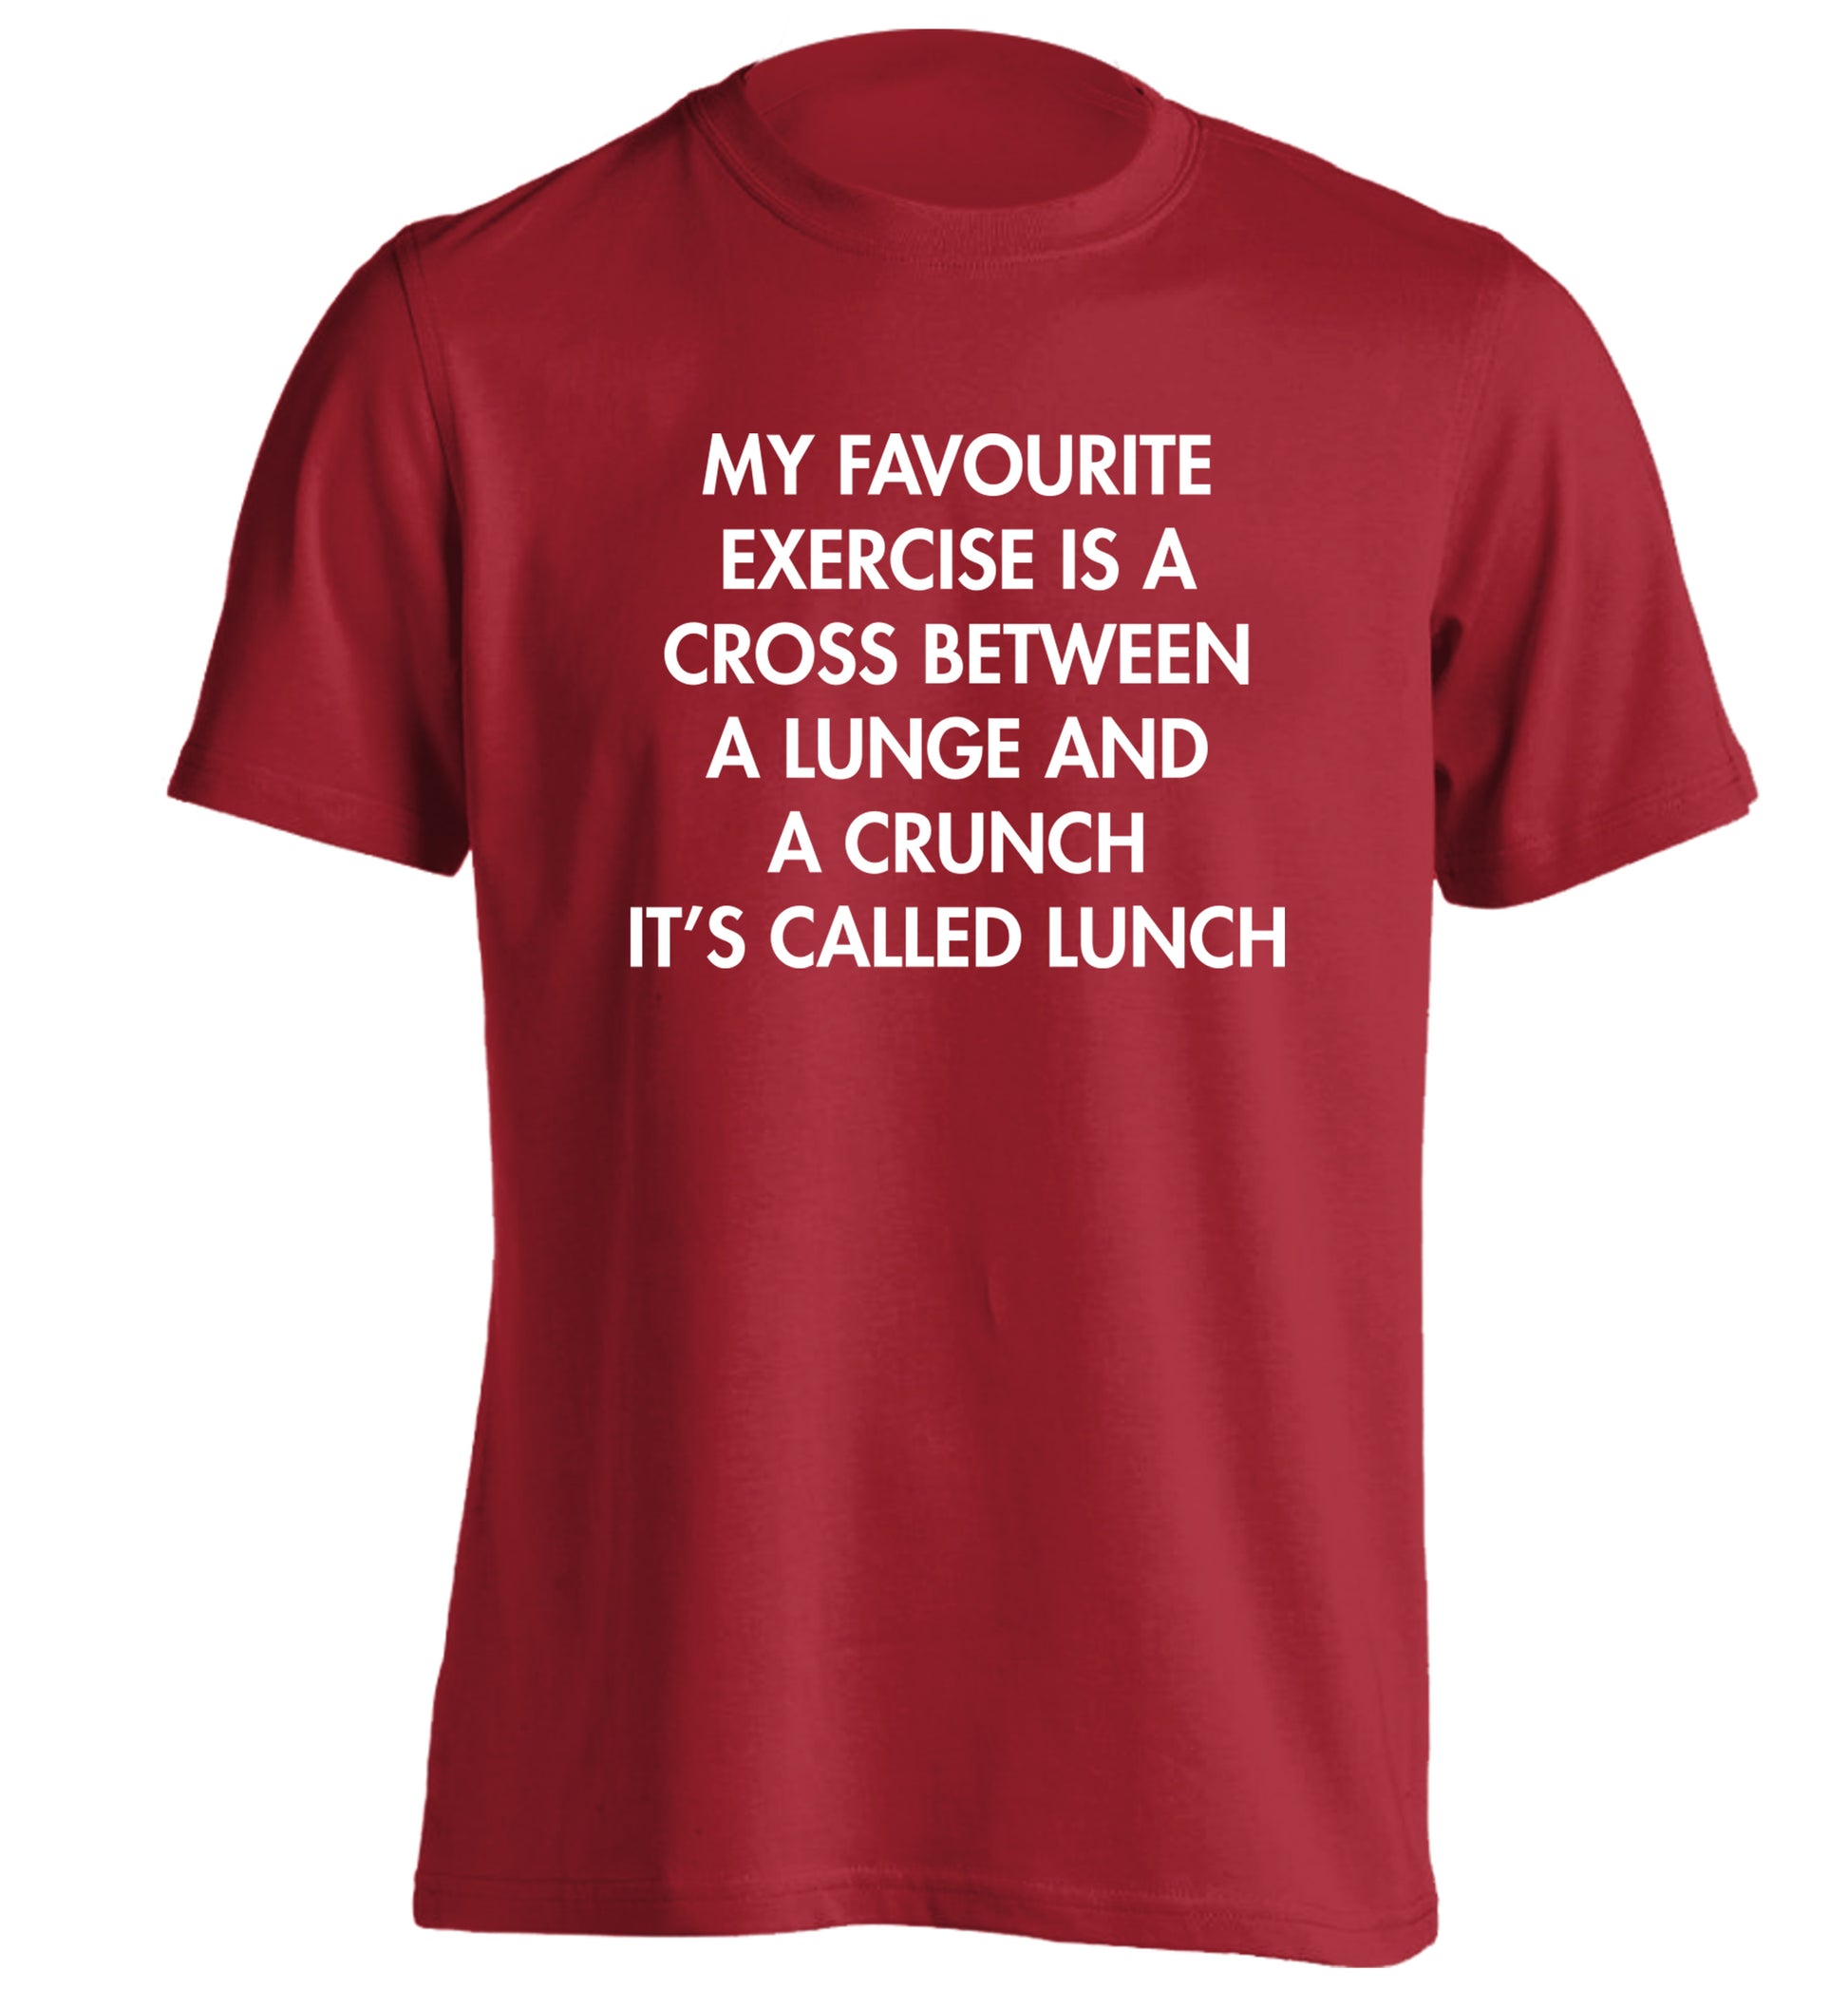 My favourite exercise is a cross between a lung and a crunch it's called lunch adults unisex red Tshirt 2XL